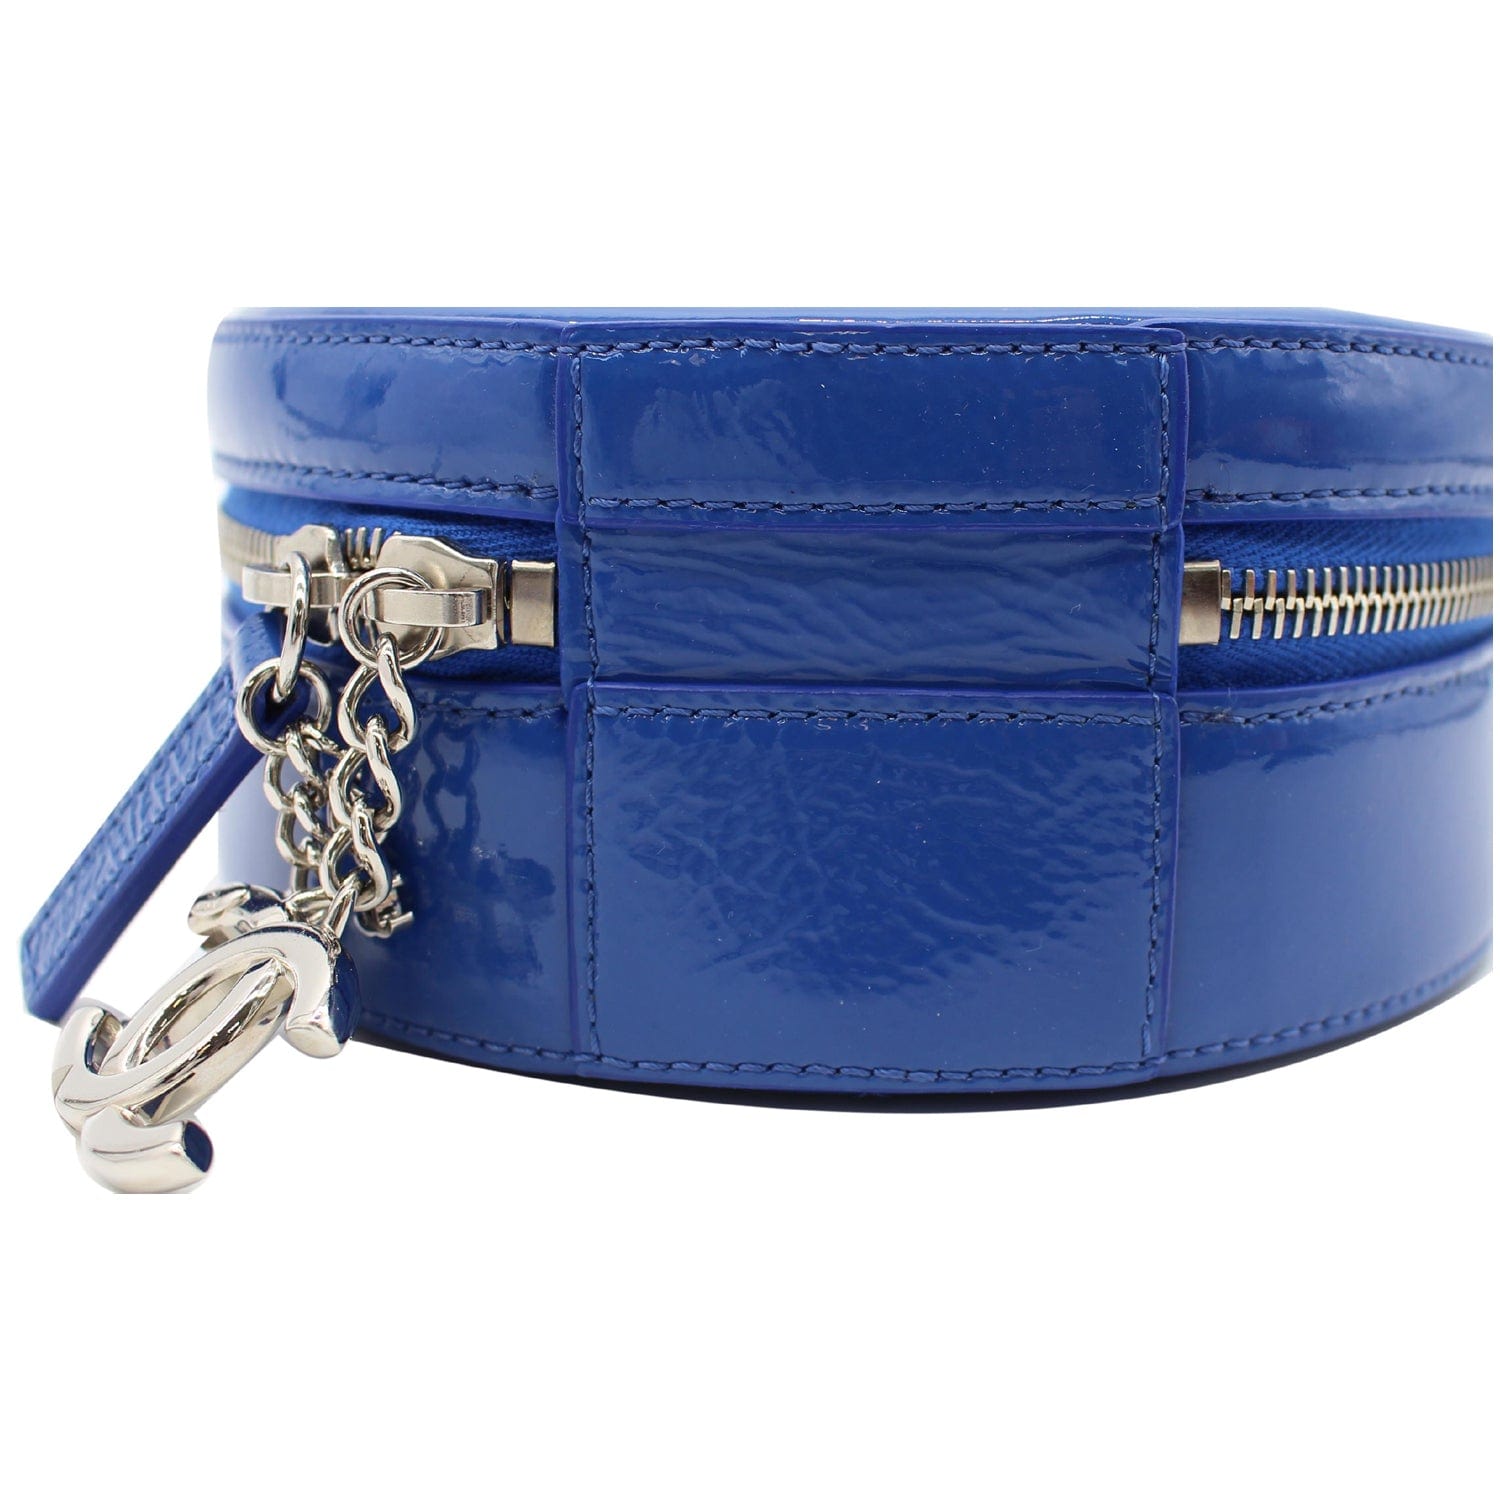 Patent leather crossbody bag PAULS BOUTIQUE Blue in Patent leather -  20301873